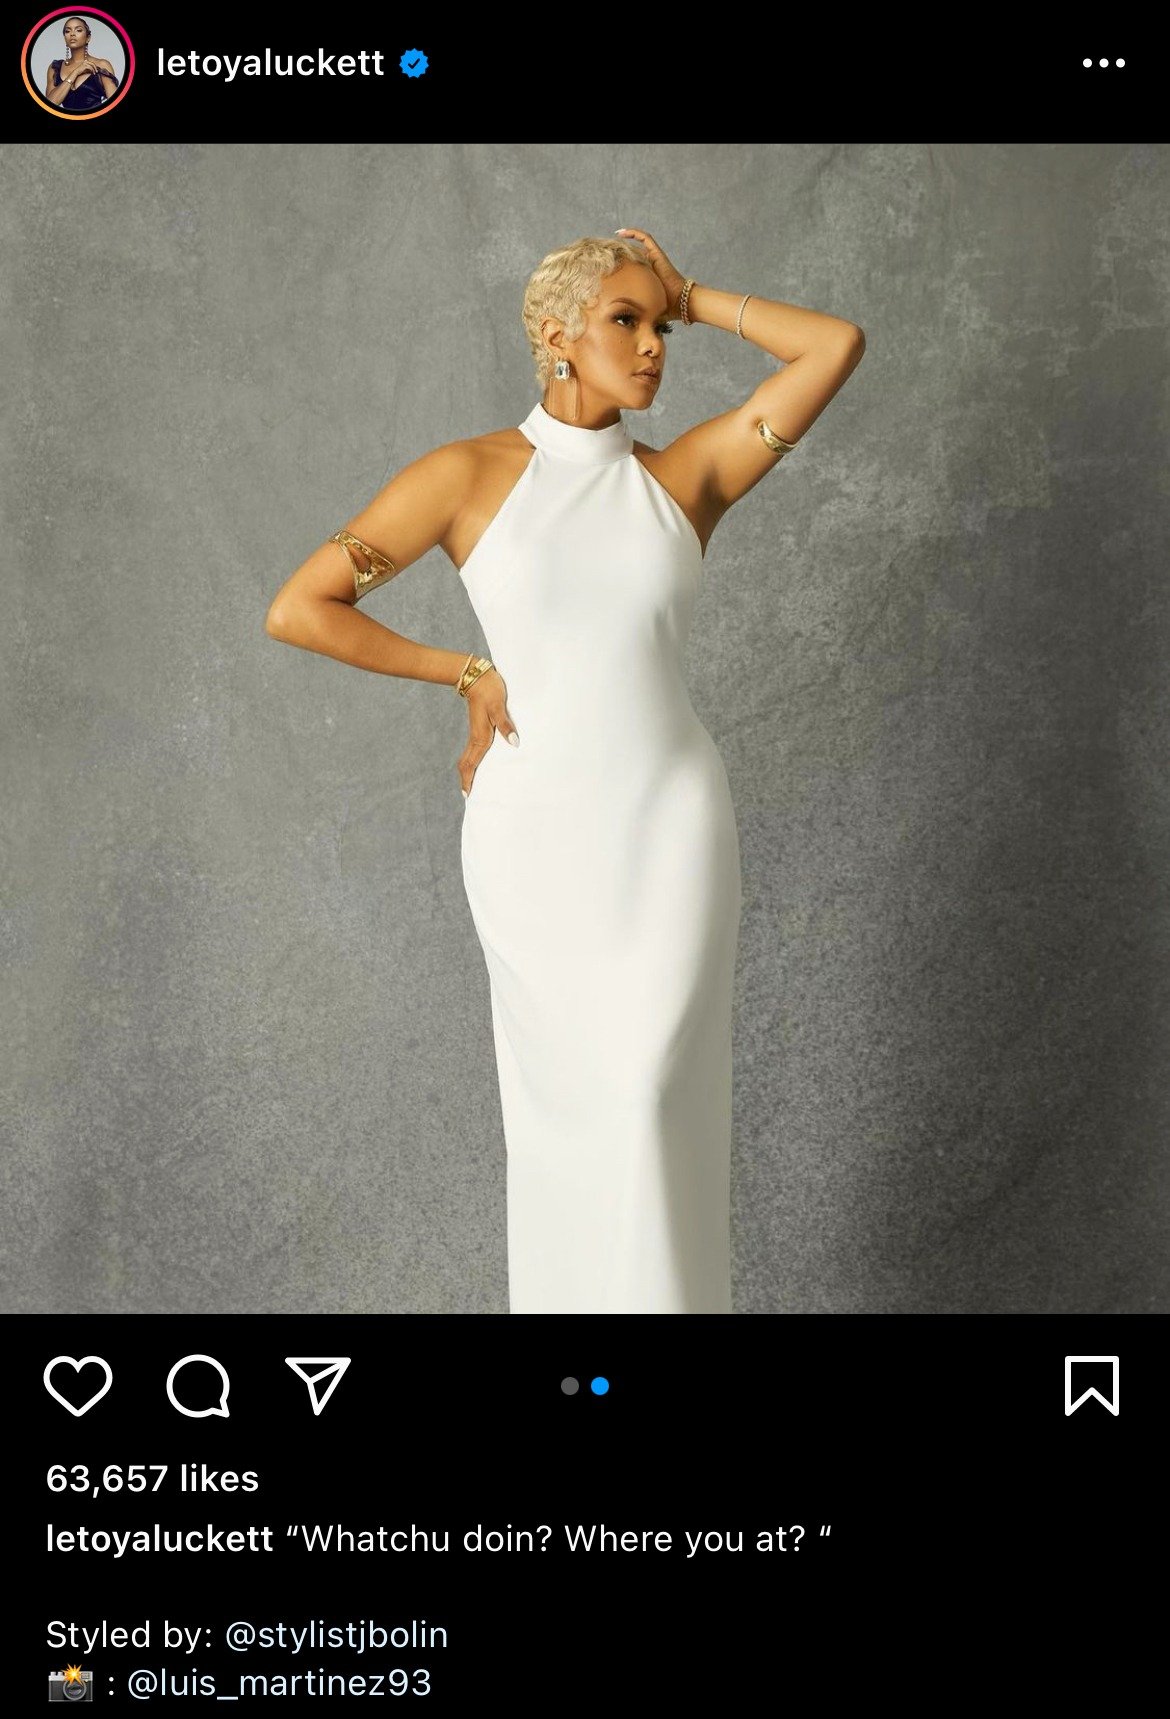 LeToya Luckett wearing a gorgeous white dress showing her curves and her new figure. | Photo: instagram.com/letoyaluckett